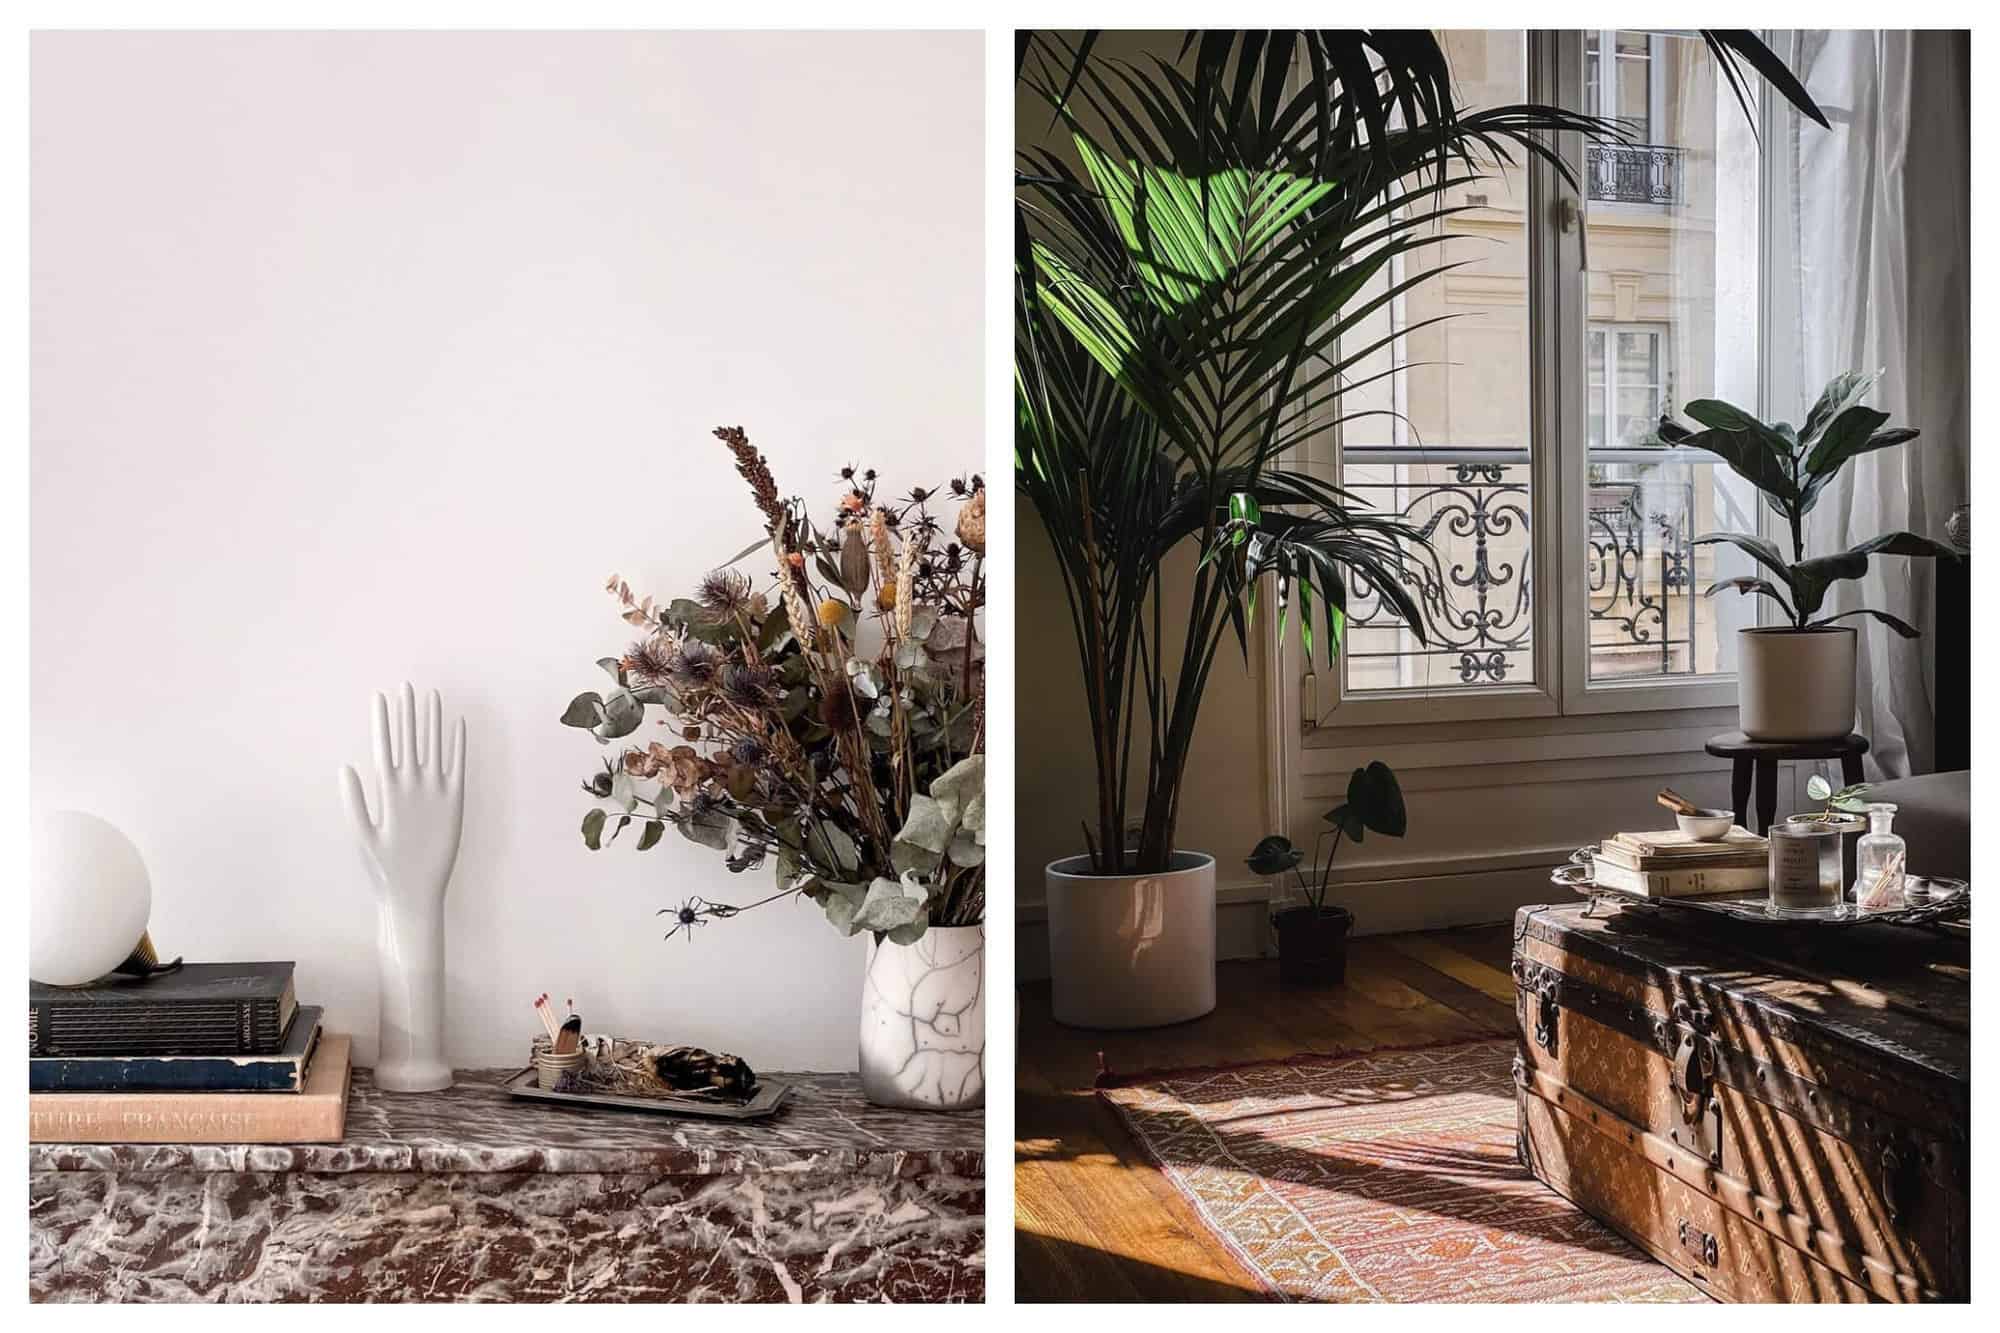 Left: A brown marble counter top is pictured with a variety of accessories on top including books, a ceramic hand and wrist sculpture, matches and a vase with dried flowers. Right: A sun-filled room within apartment is pictured with two large potted plants. There is a Louis Vuitton trunk used as a coffee table and a large window with a Haussmanian balcony and a view of the exterior of a Parisian apartment.